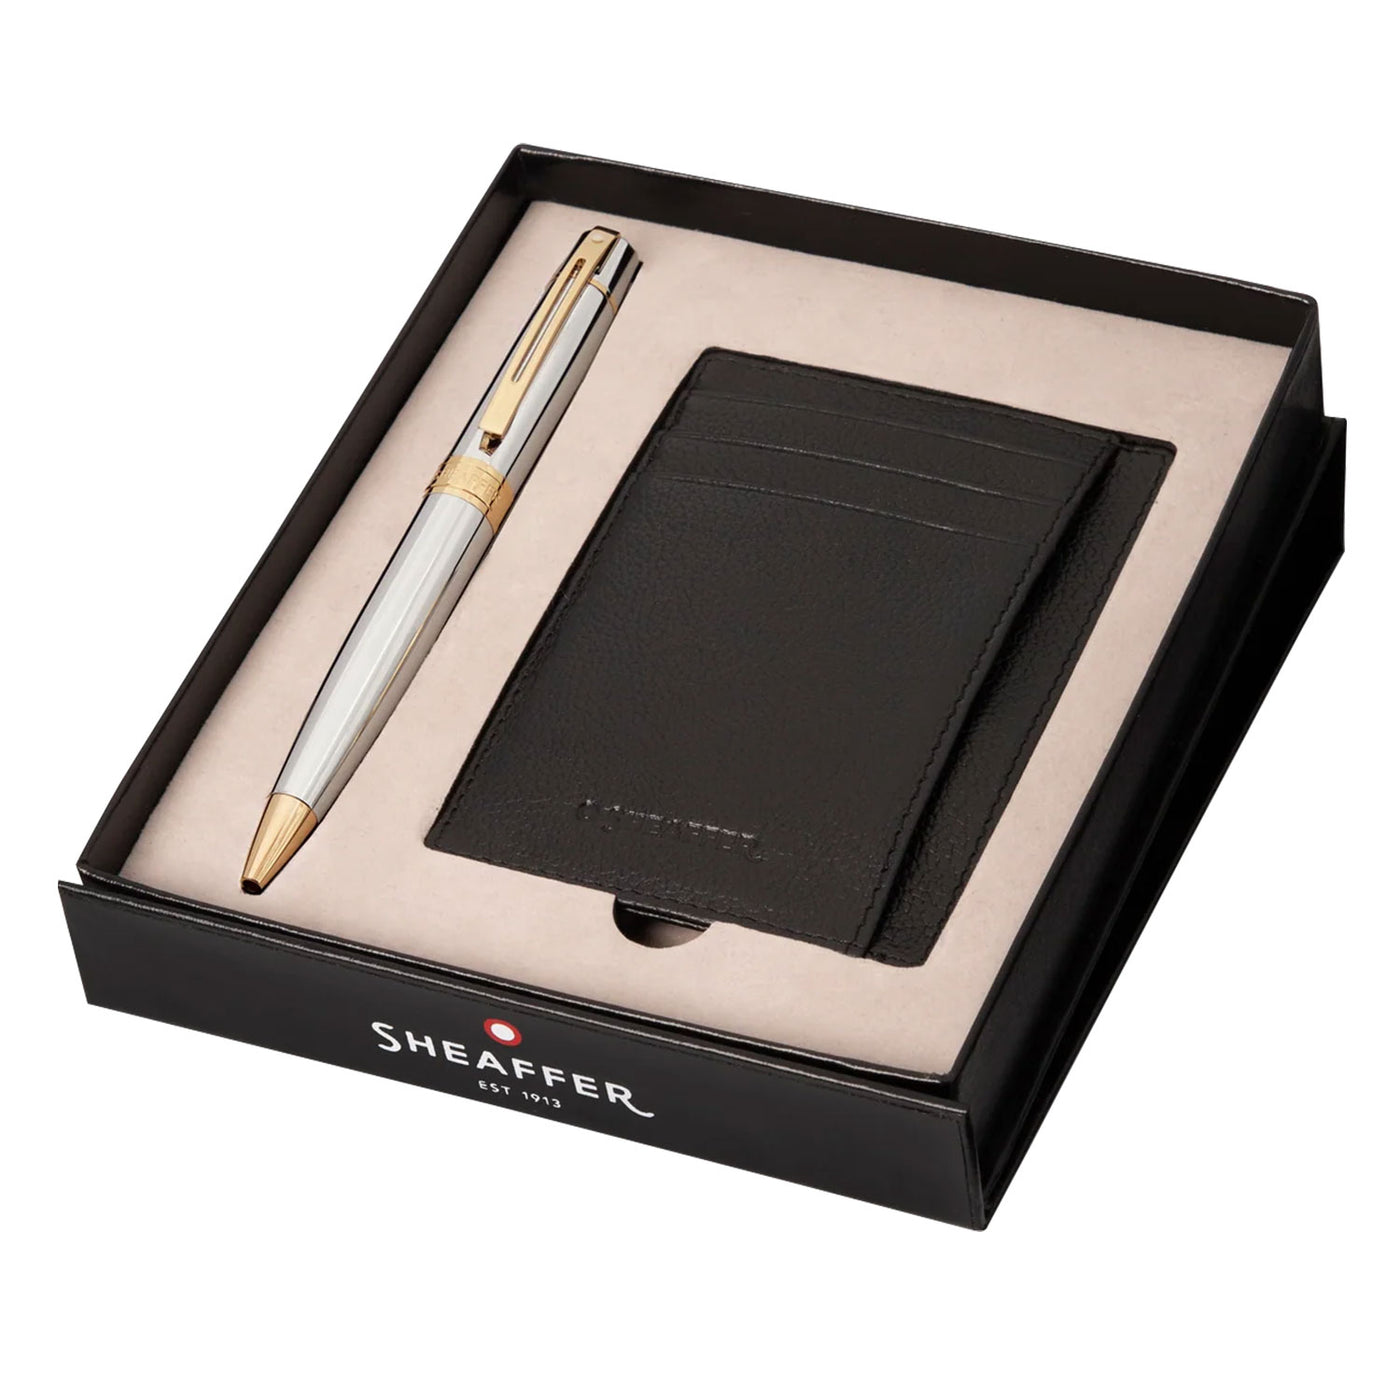 Sheaffer Gift Set - 300 Series Bright Chrome GT Ball Pen with Credit Card Holder